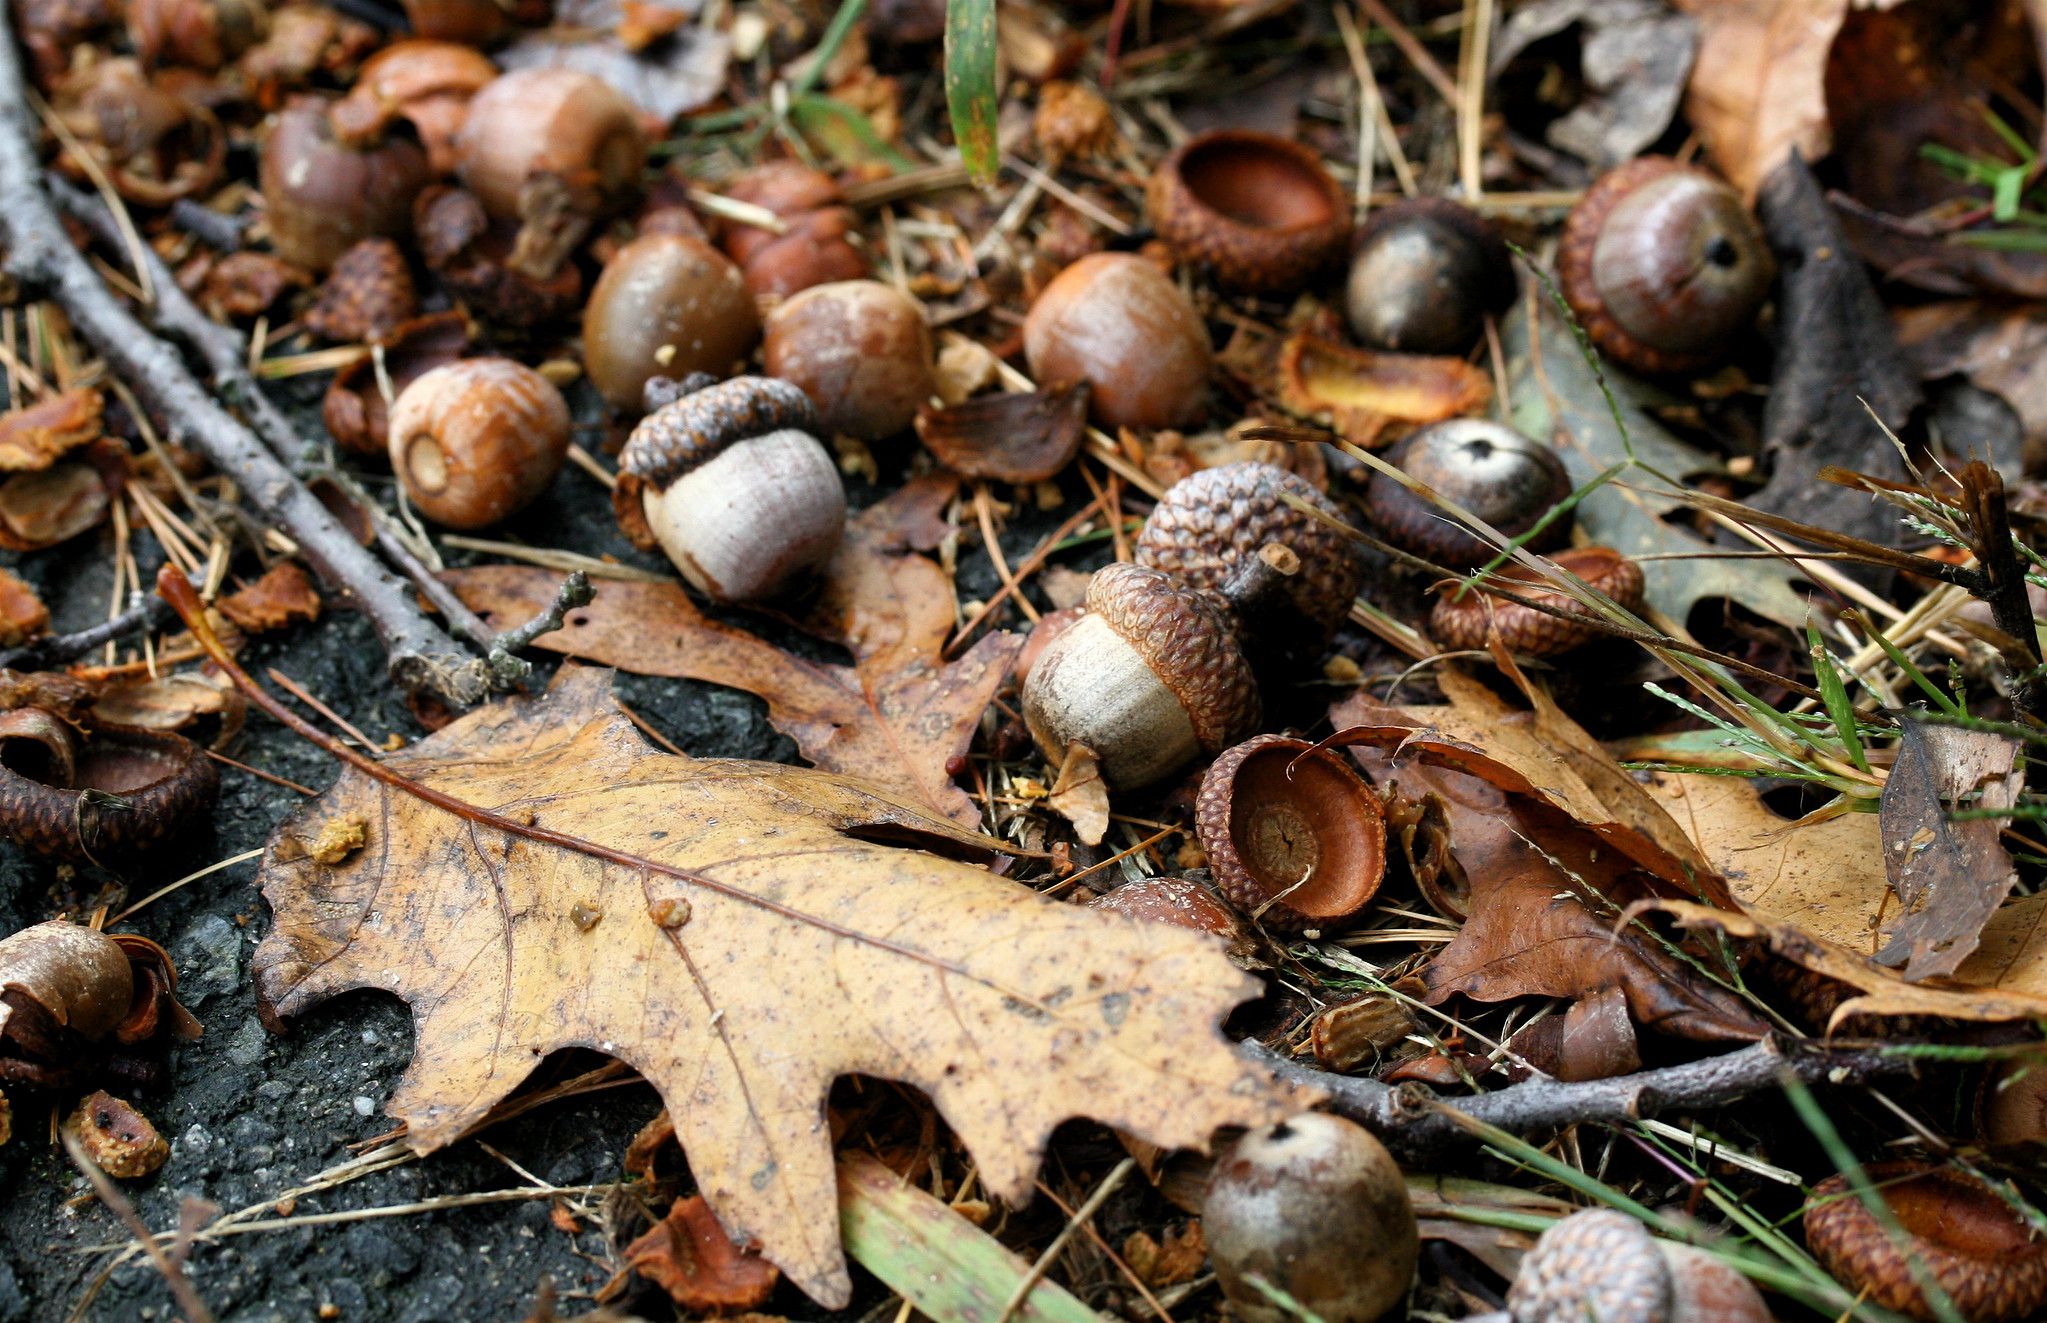 Acorns are a favorite natural browse for whitetails